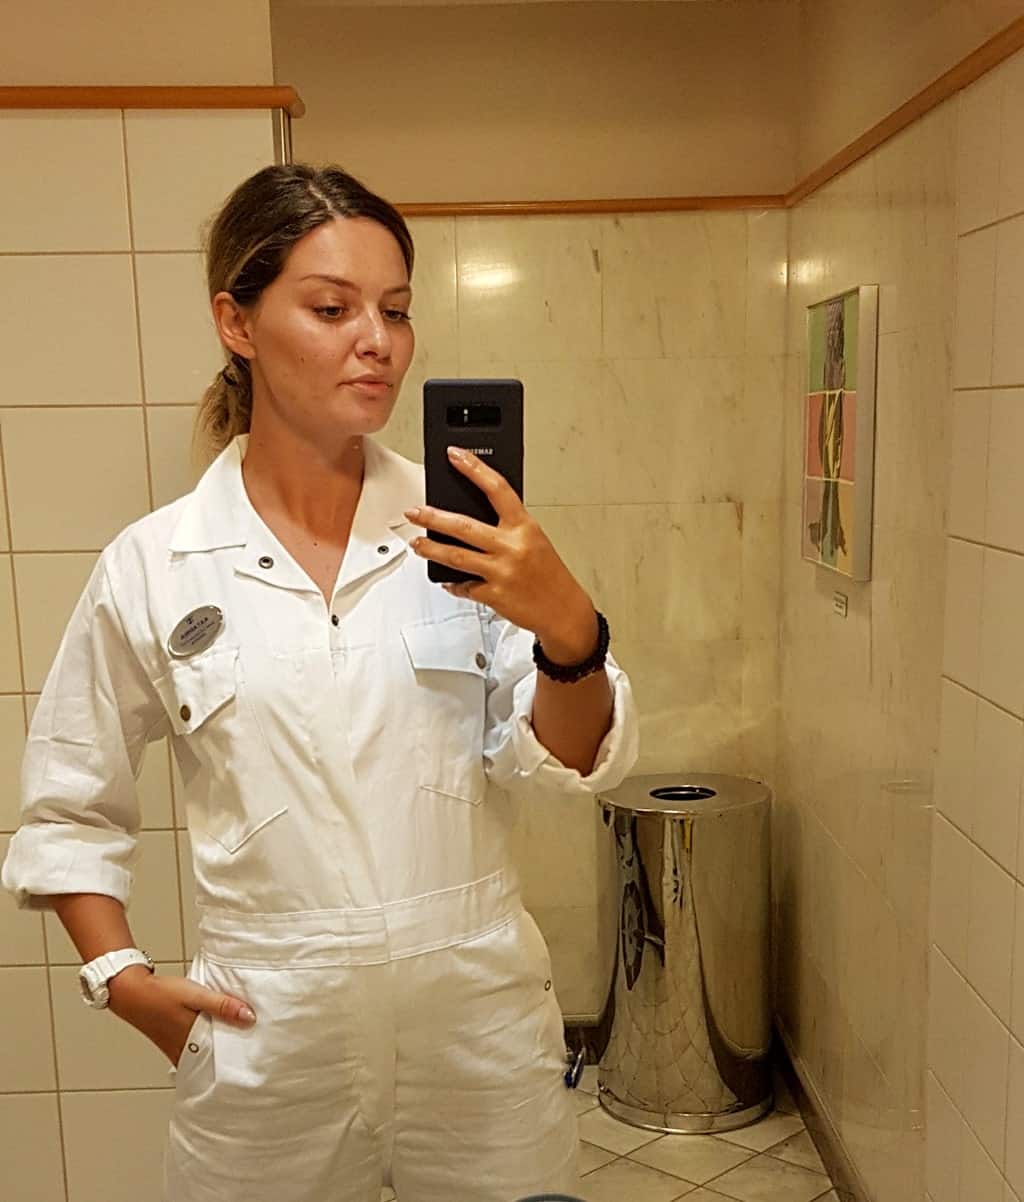 During the dry dock, crew members are required to wear safety equipment. This picture was taken in a bathroom, I am dressed in a safety equipment